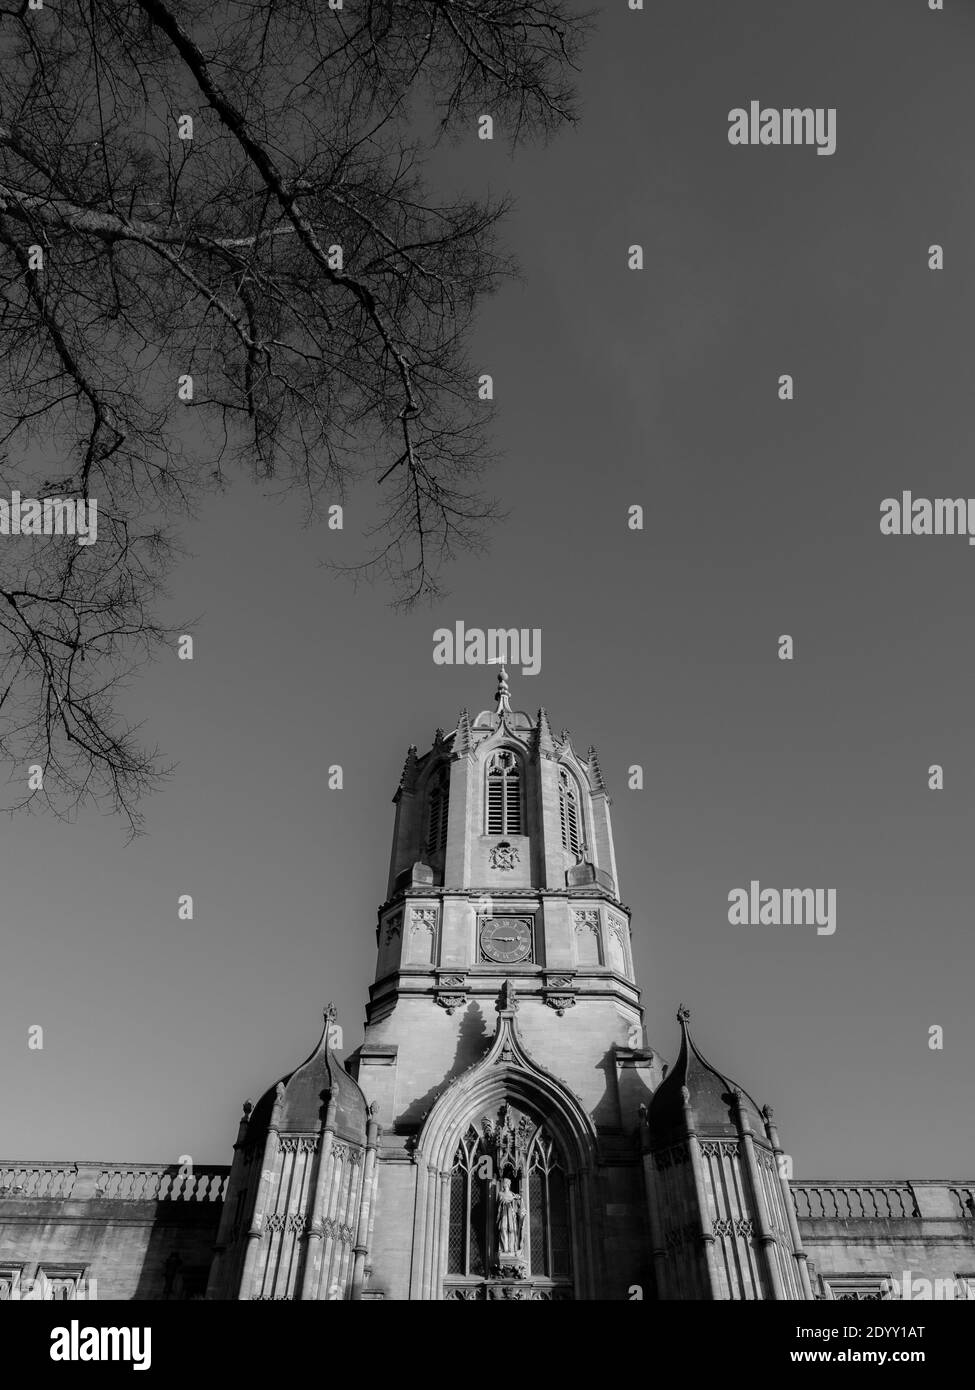 Black and White Landscape of Tom Tower In Winter, Christ Church College, University of Oxford, Oxfordshire, England, UK, GB. Stock Photo